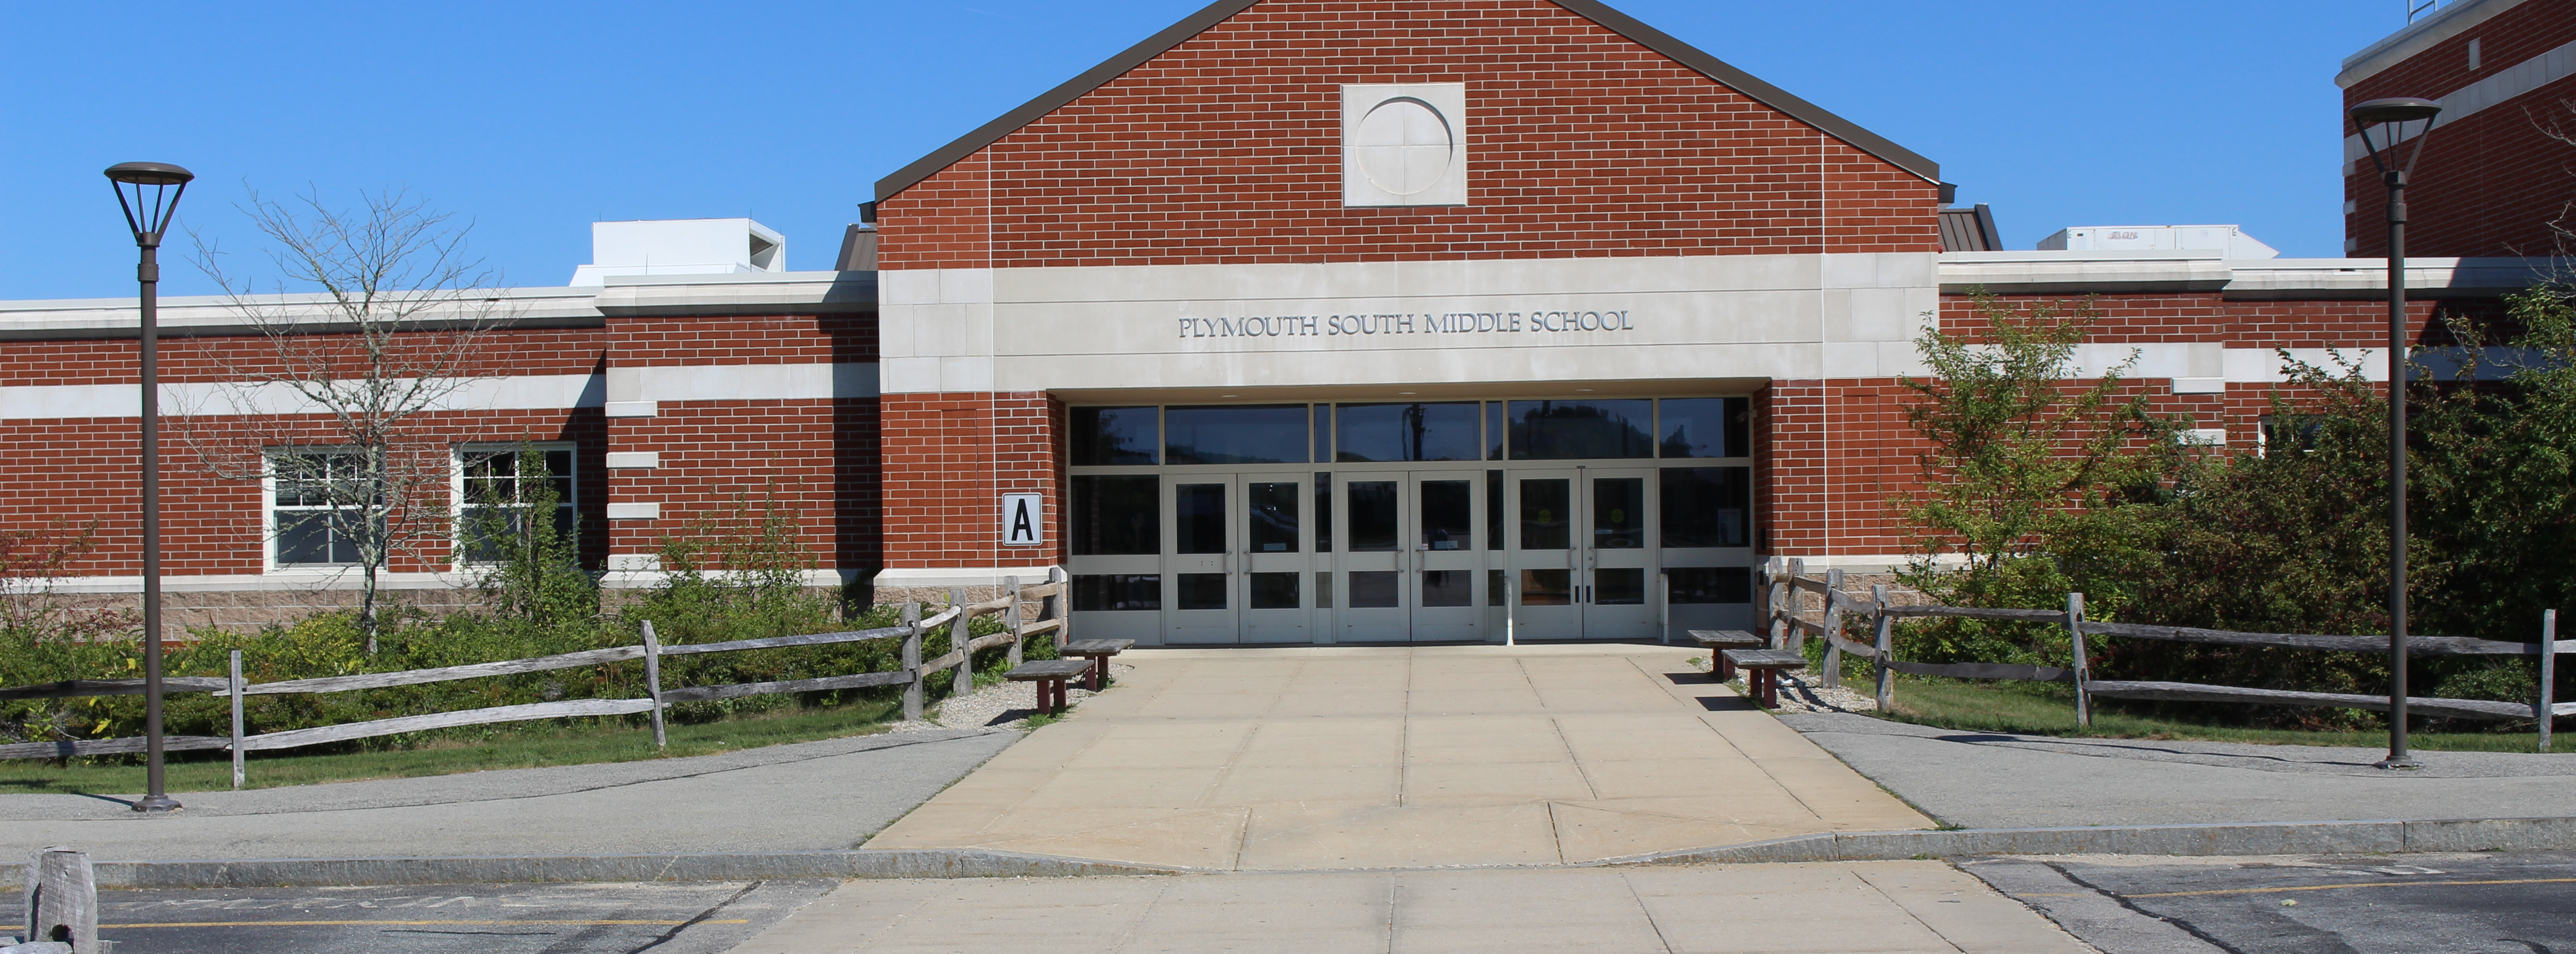 Plymouth South Middle School